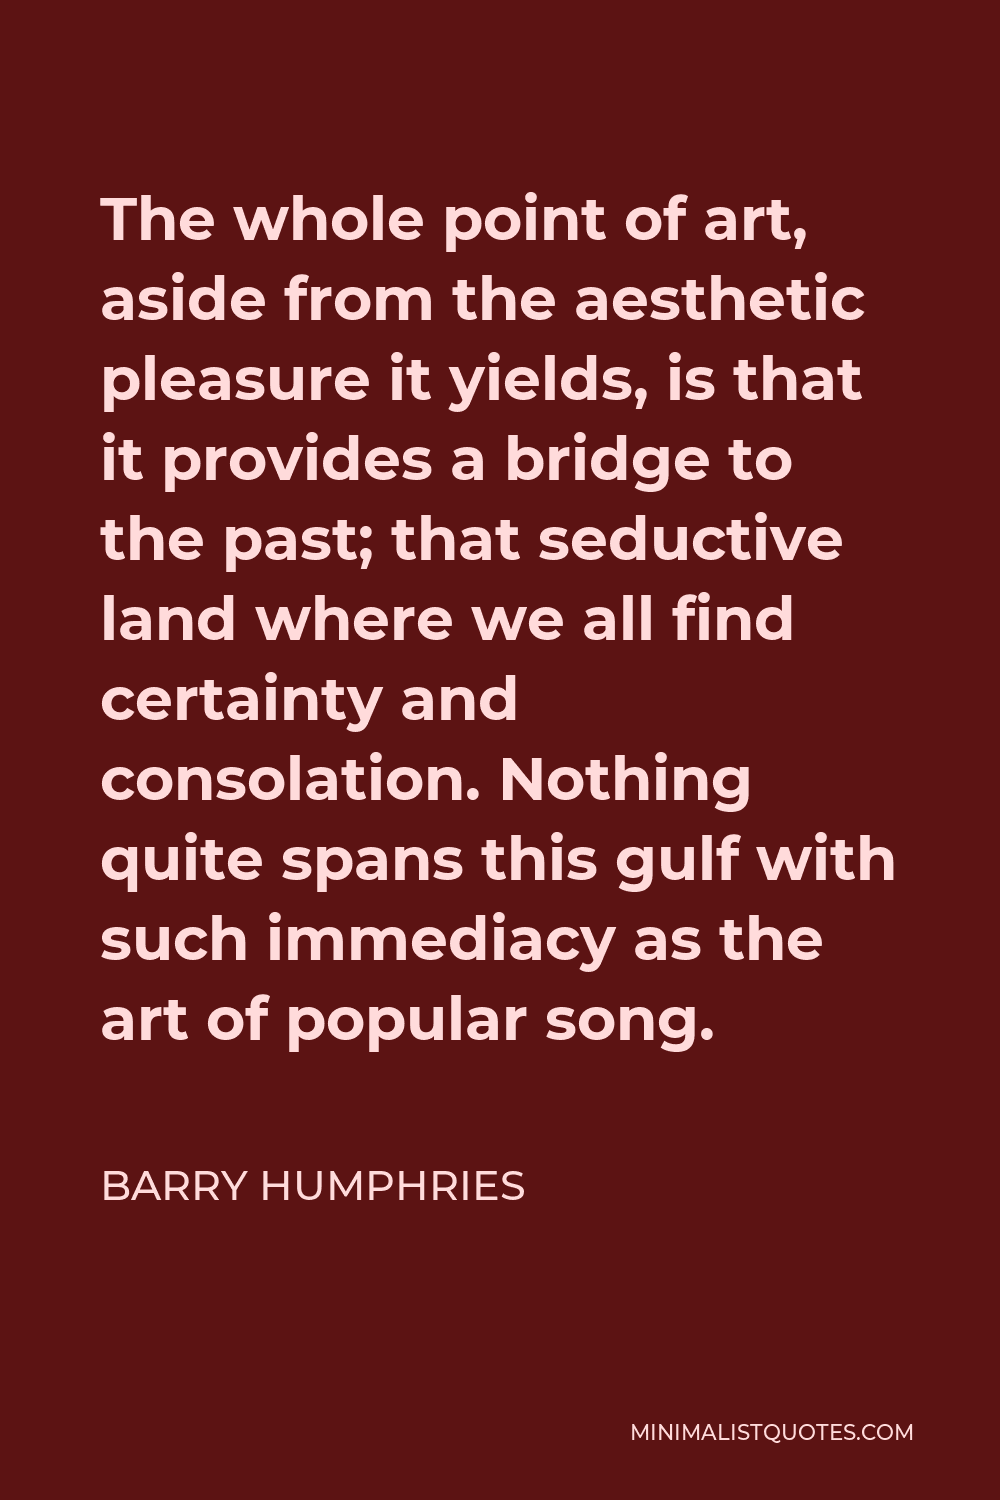 Barry Humphries Quote - The whole point of art, aside from the aesthetic pleasure it yields, is that it provides a bridge to the past; that seductive land where we all find certainty and consolation. Nothing quite spans this gulf with such immediacy as the art of popular song.